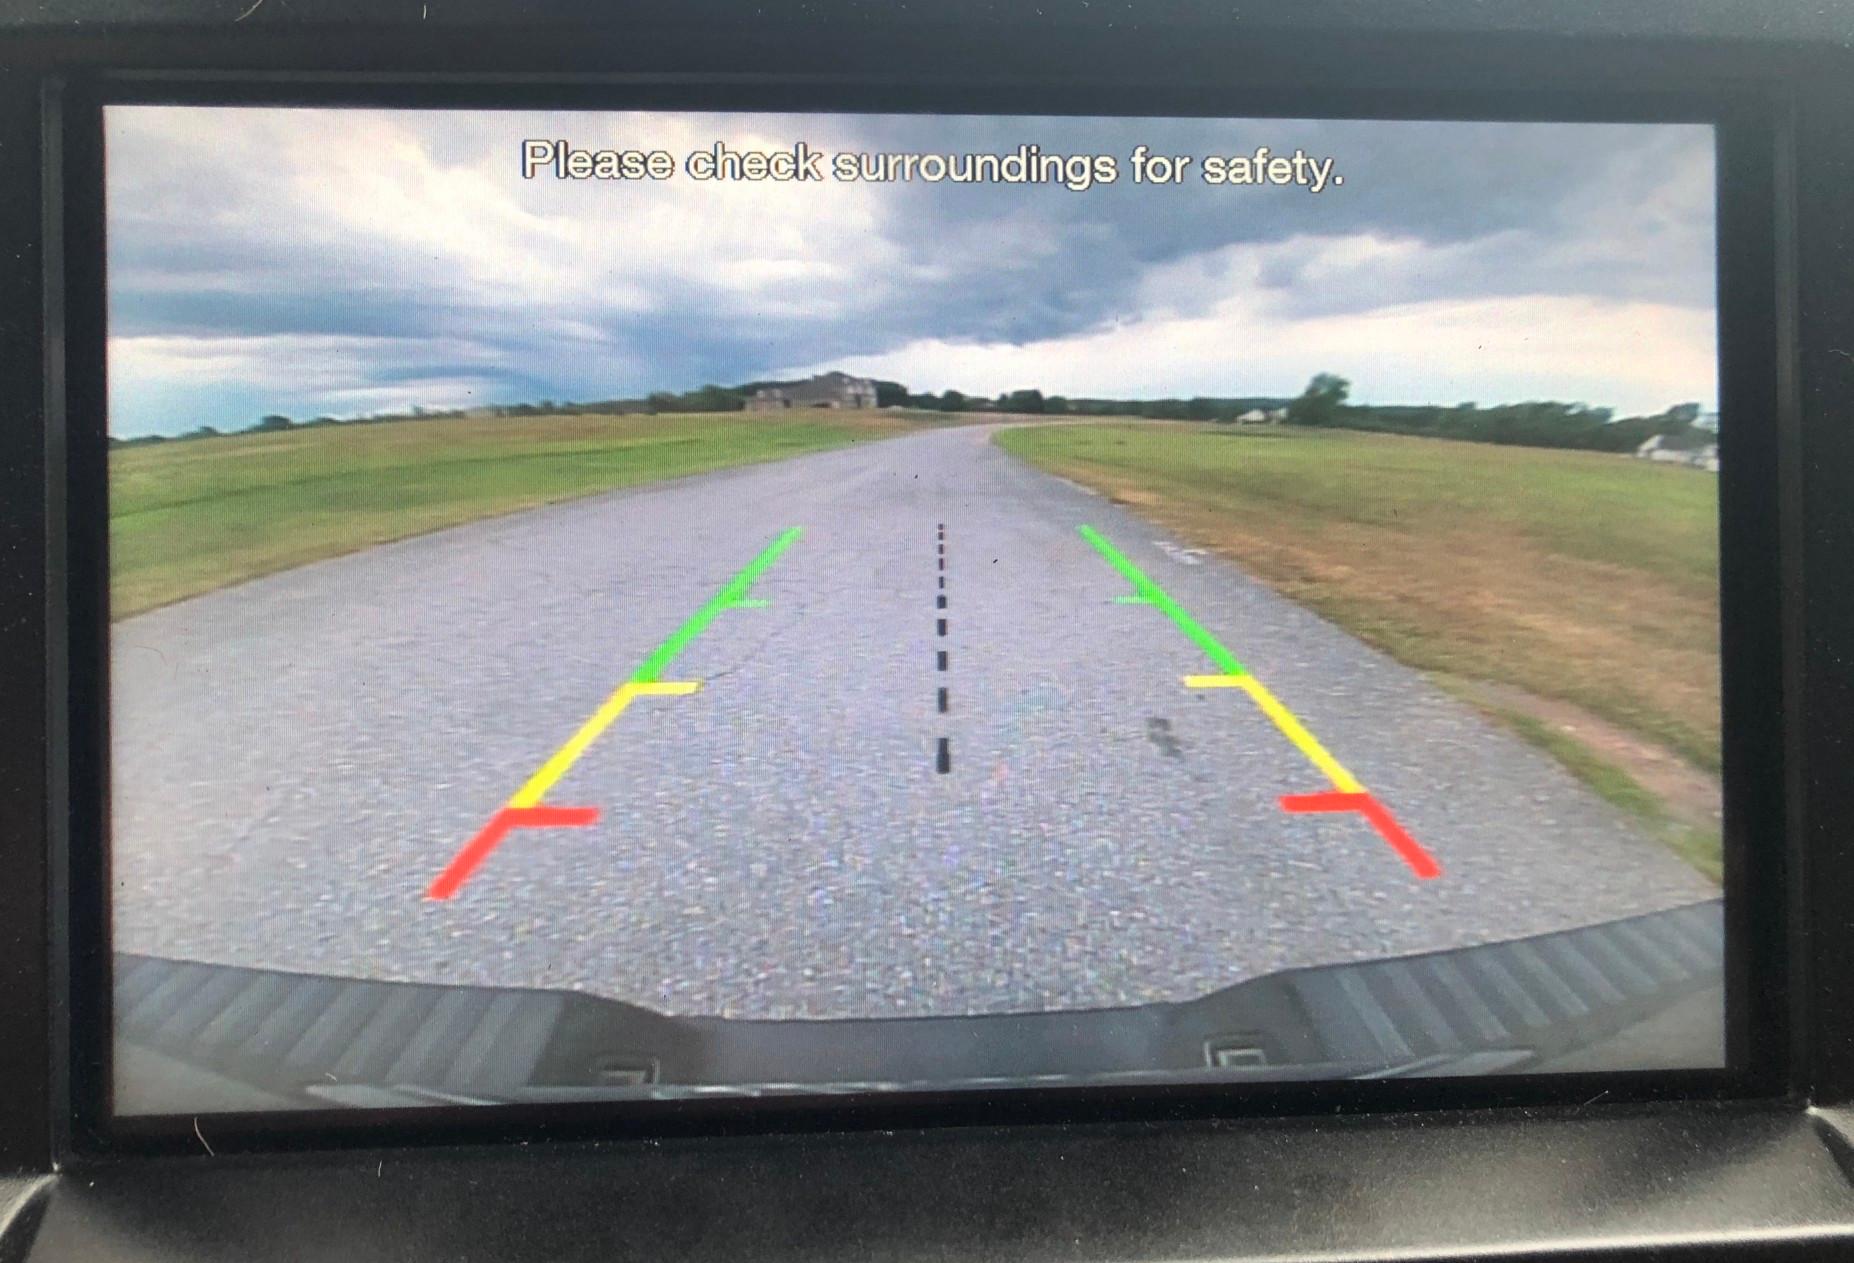 Rearview cameras are now standard, but they were invented a lot longer ago than you’d think.